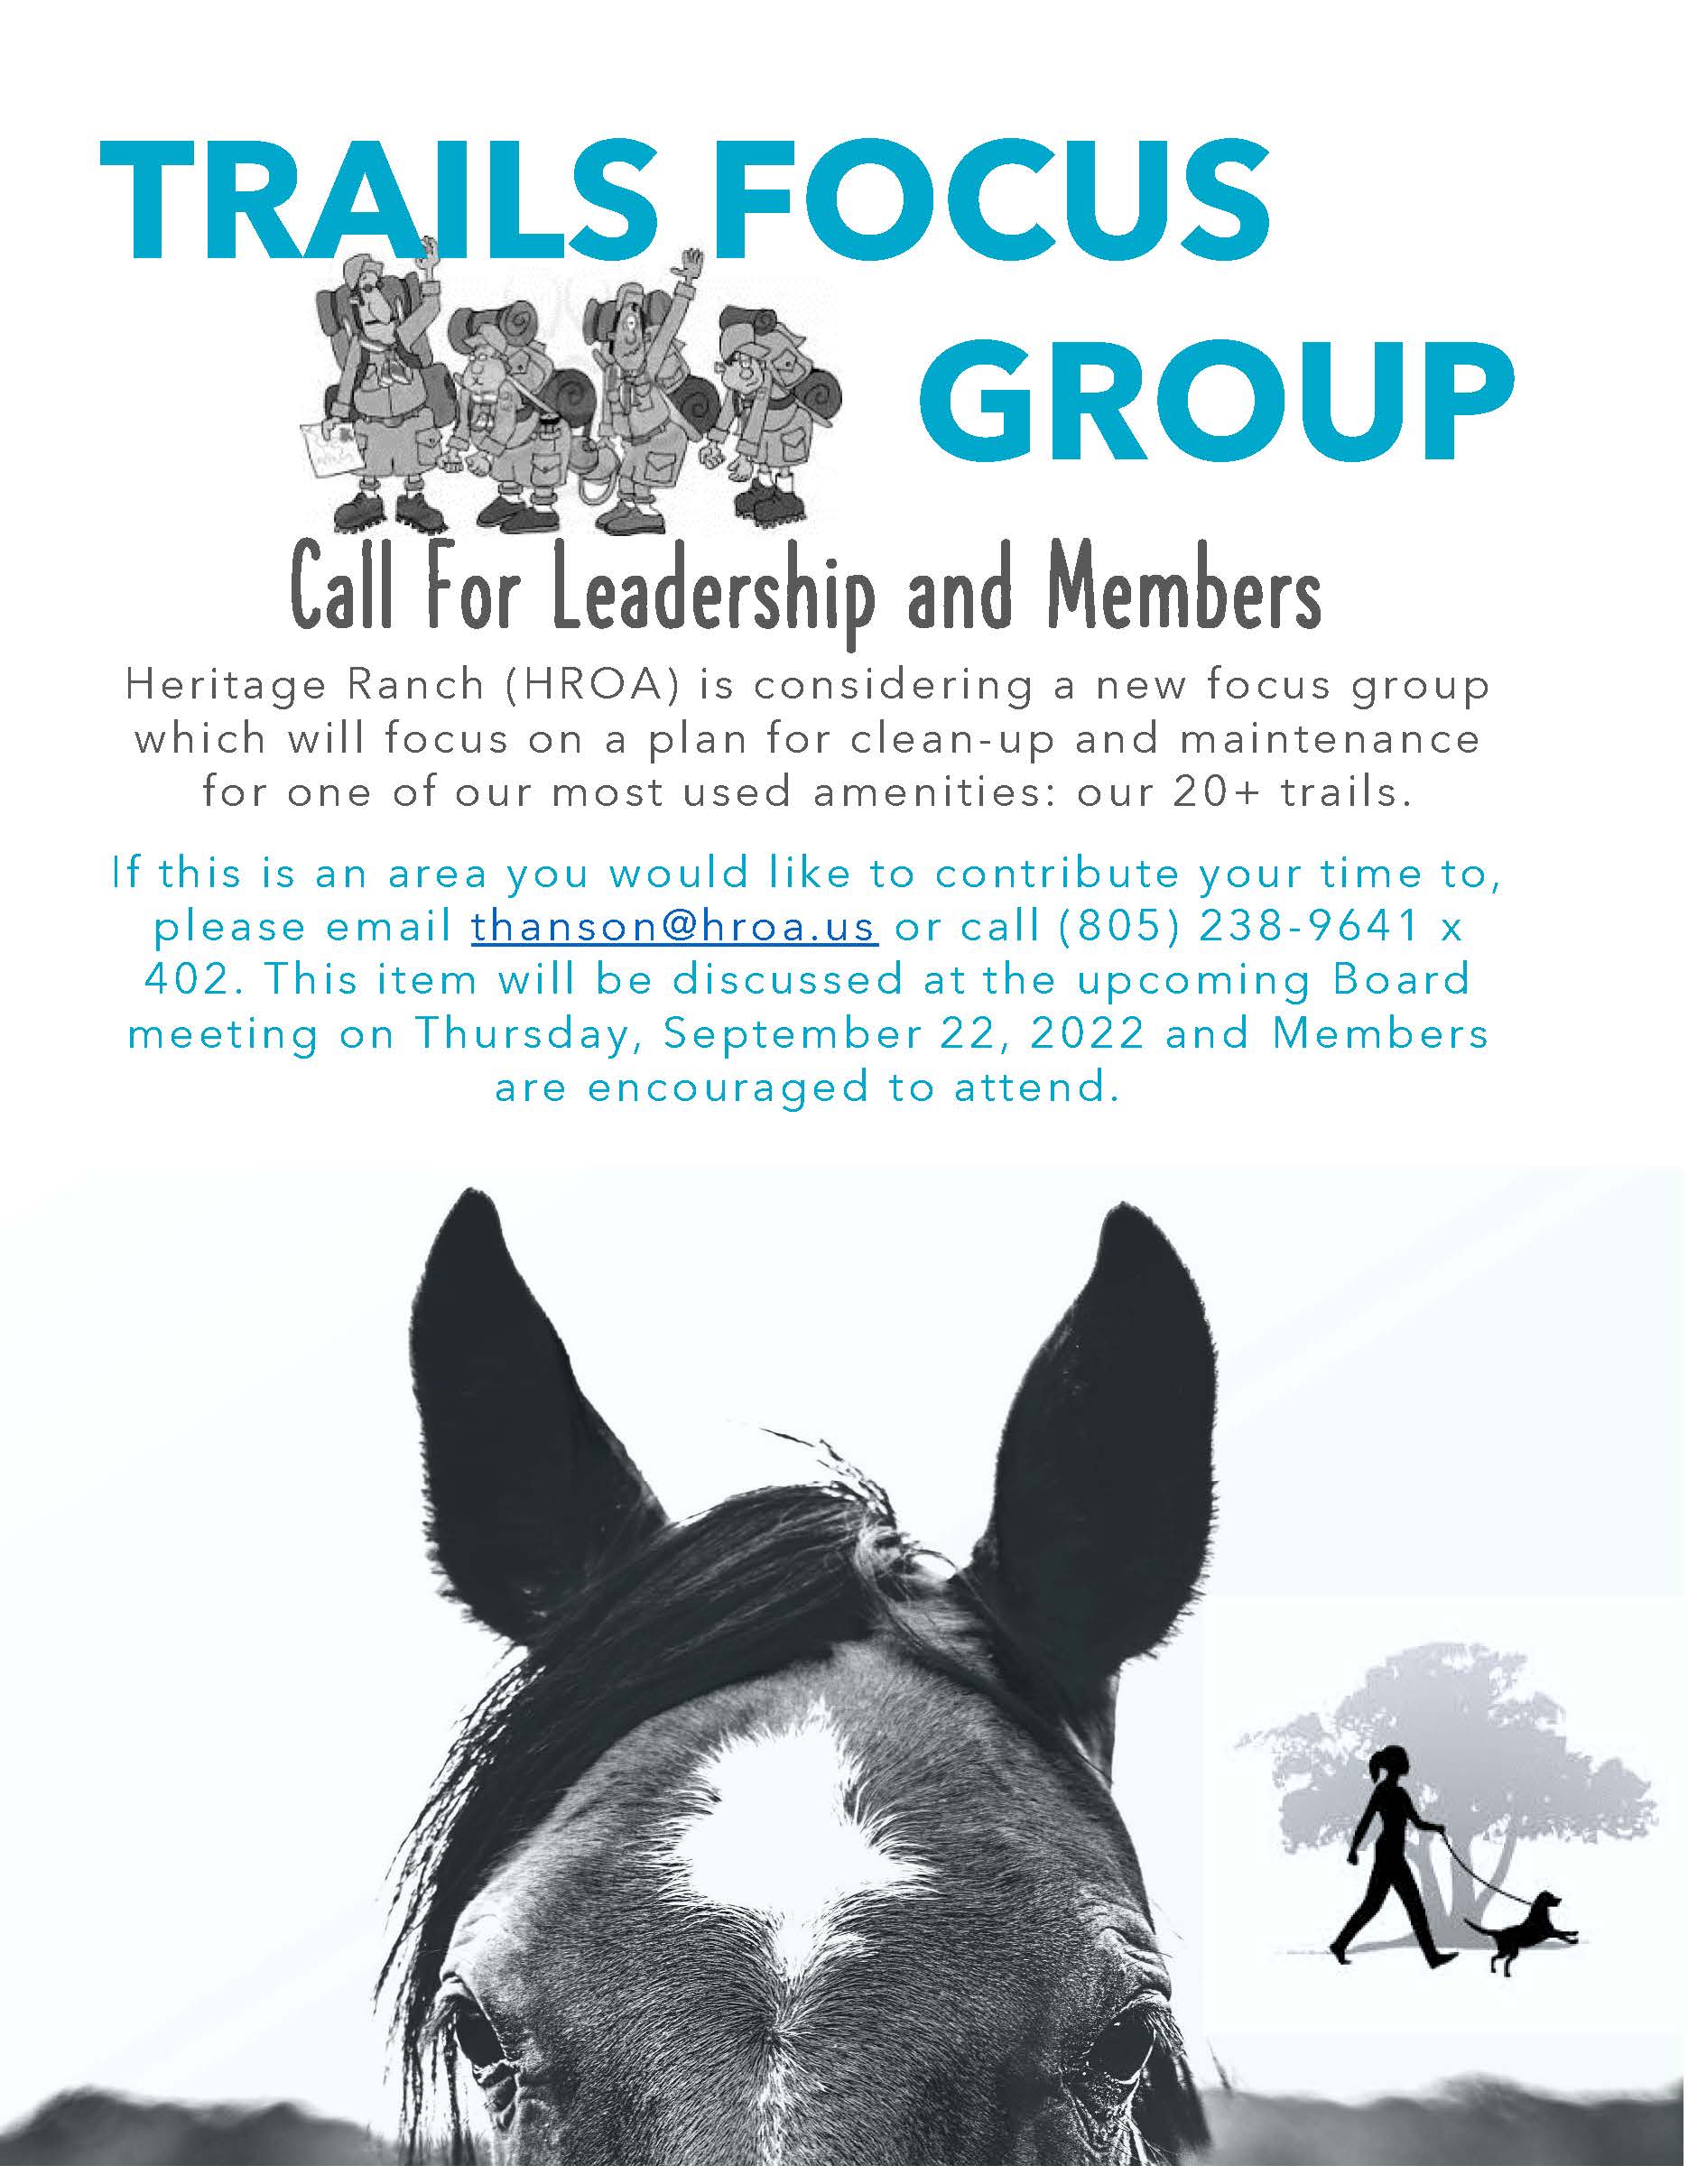 Trails Focus Group - Call for Interest, Leadership and Members